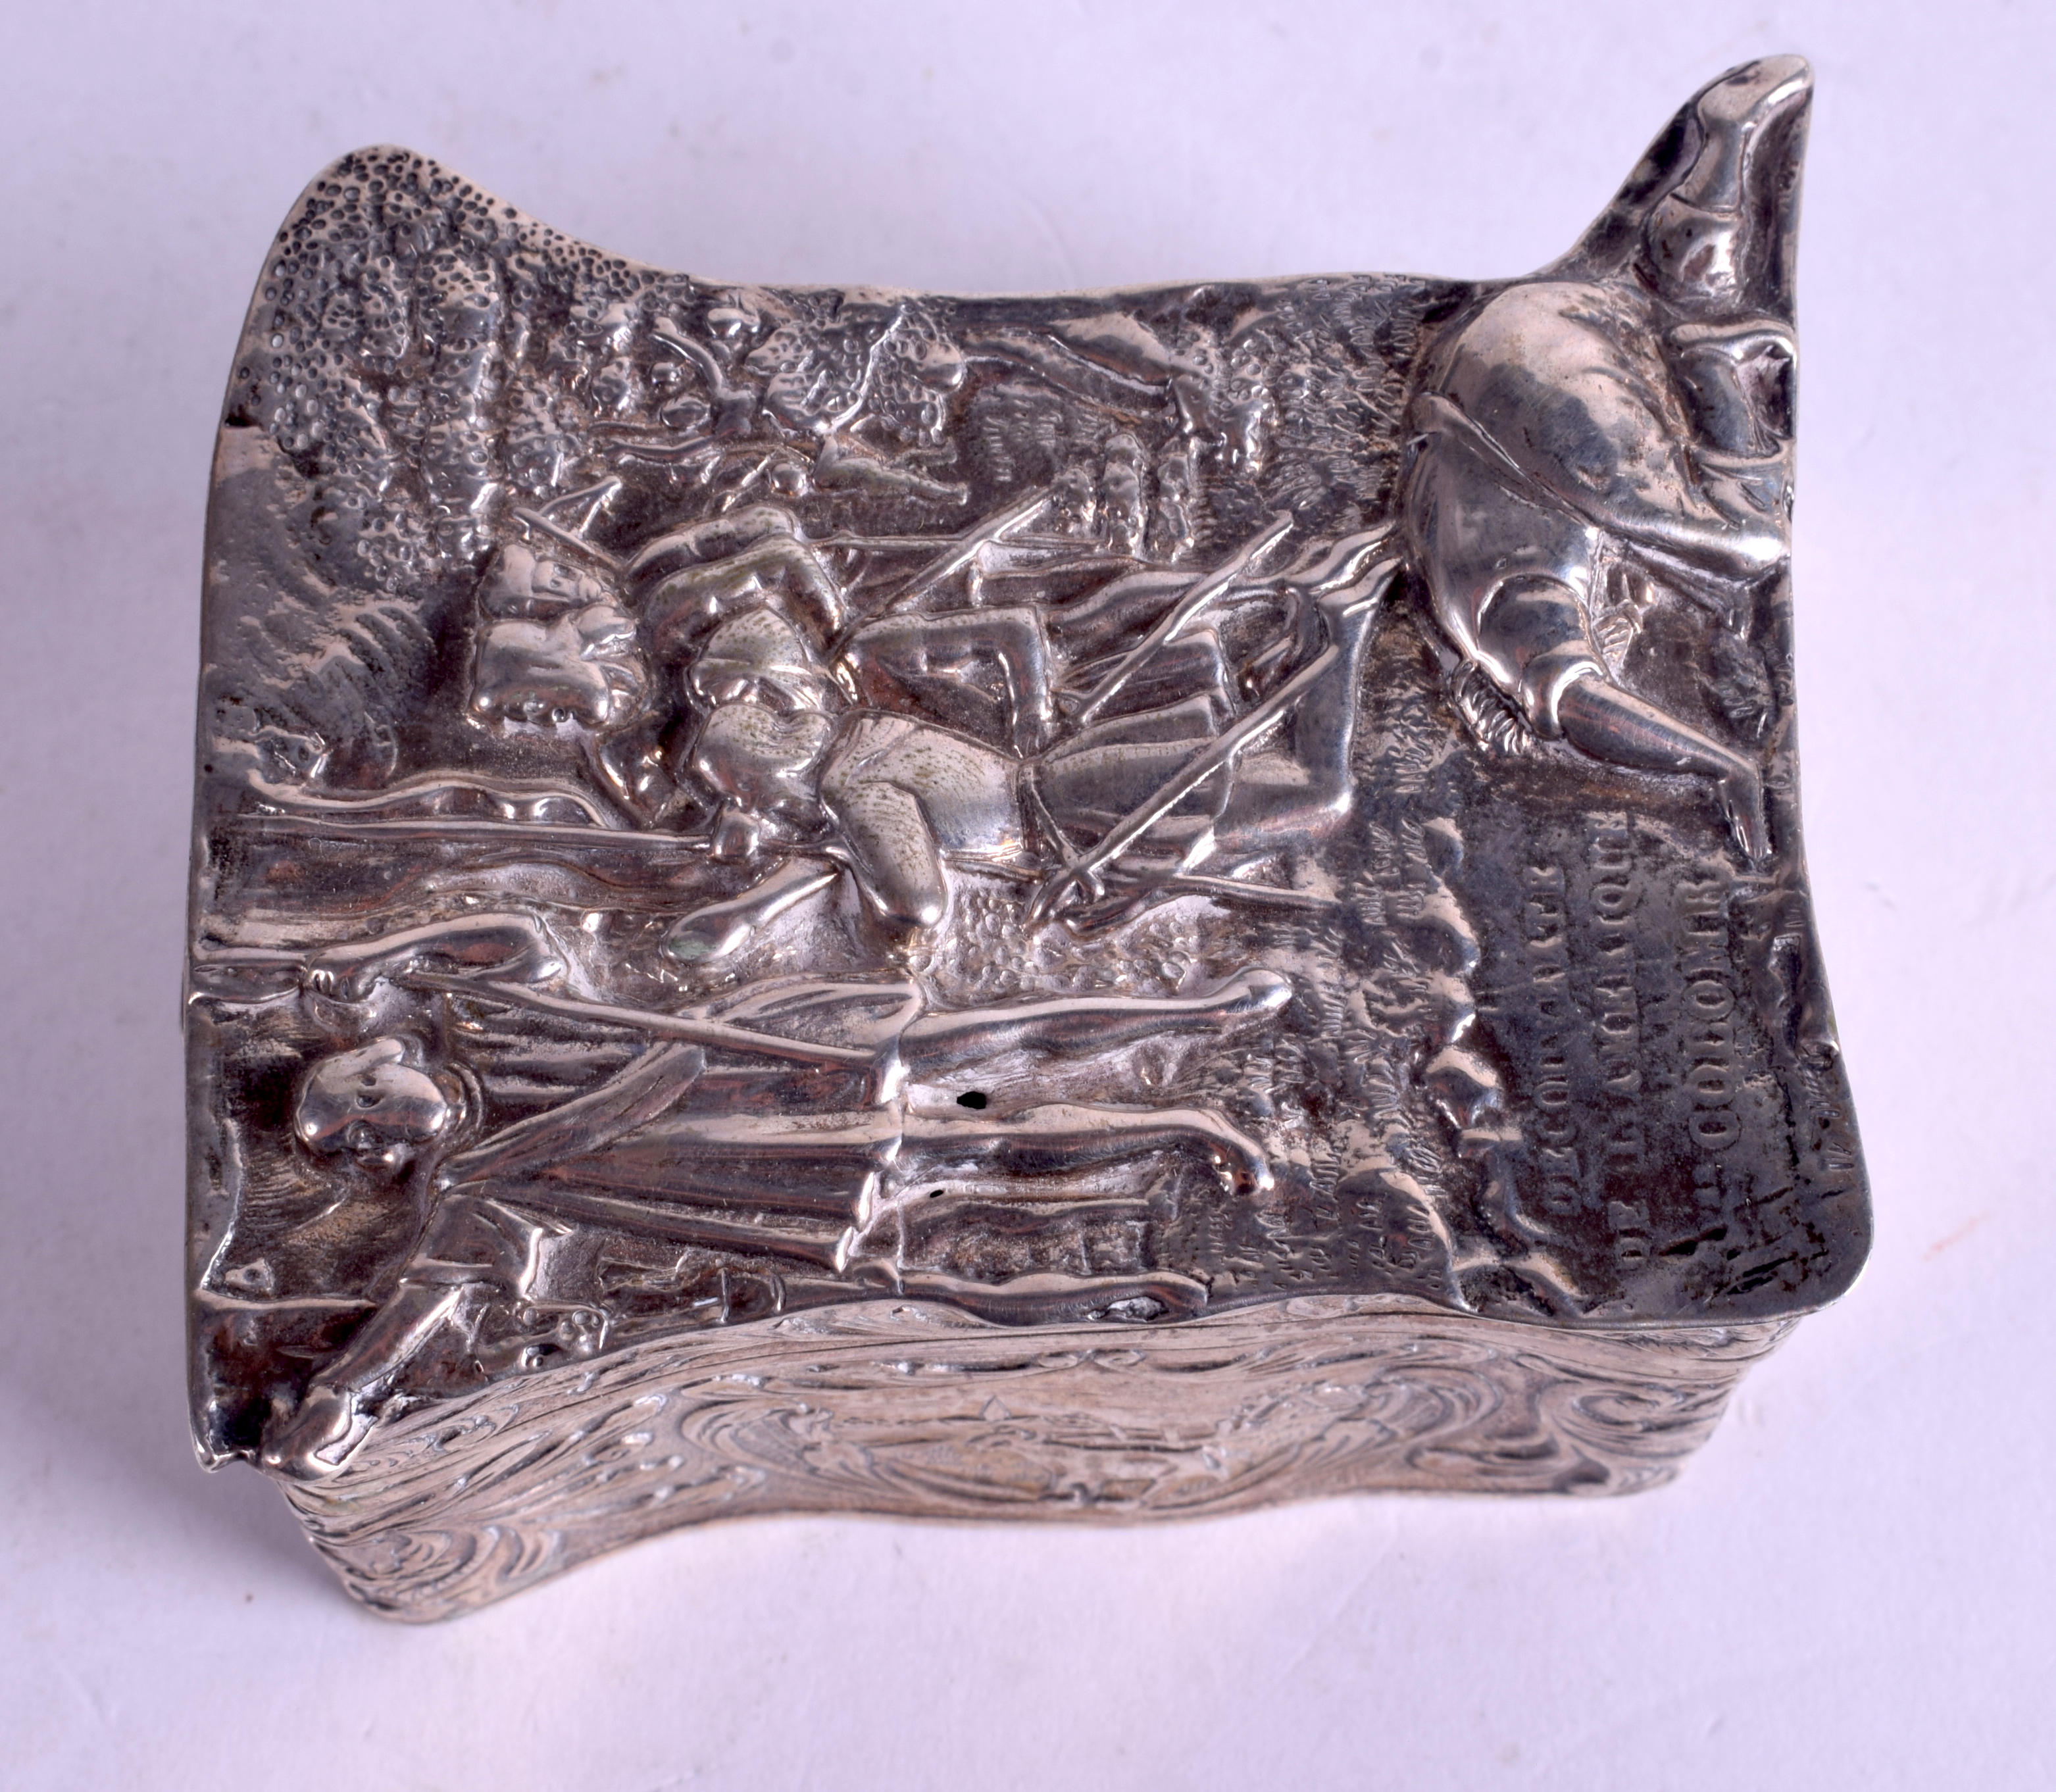 A RARE ANTIQUE CONTINENTAL SILVER BOX decorated with figures and landscapes. 5.1 oz. 7.5 cm x 6.5 c - Image 3 of 5